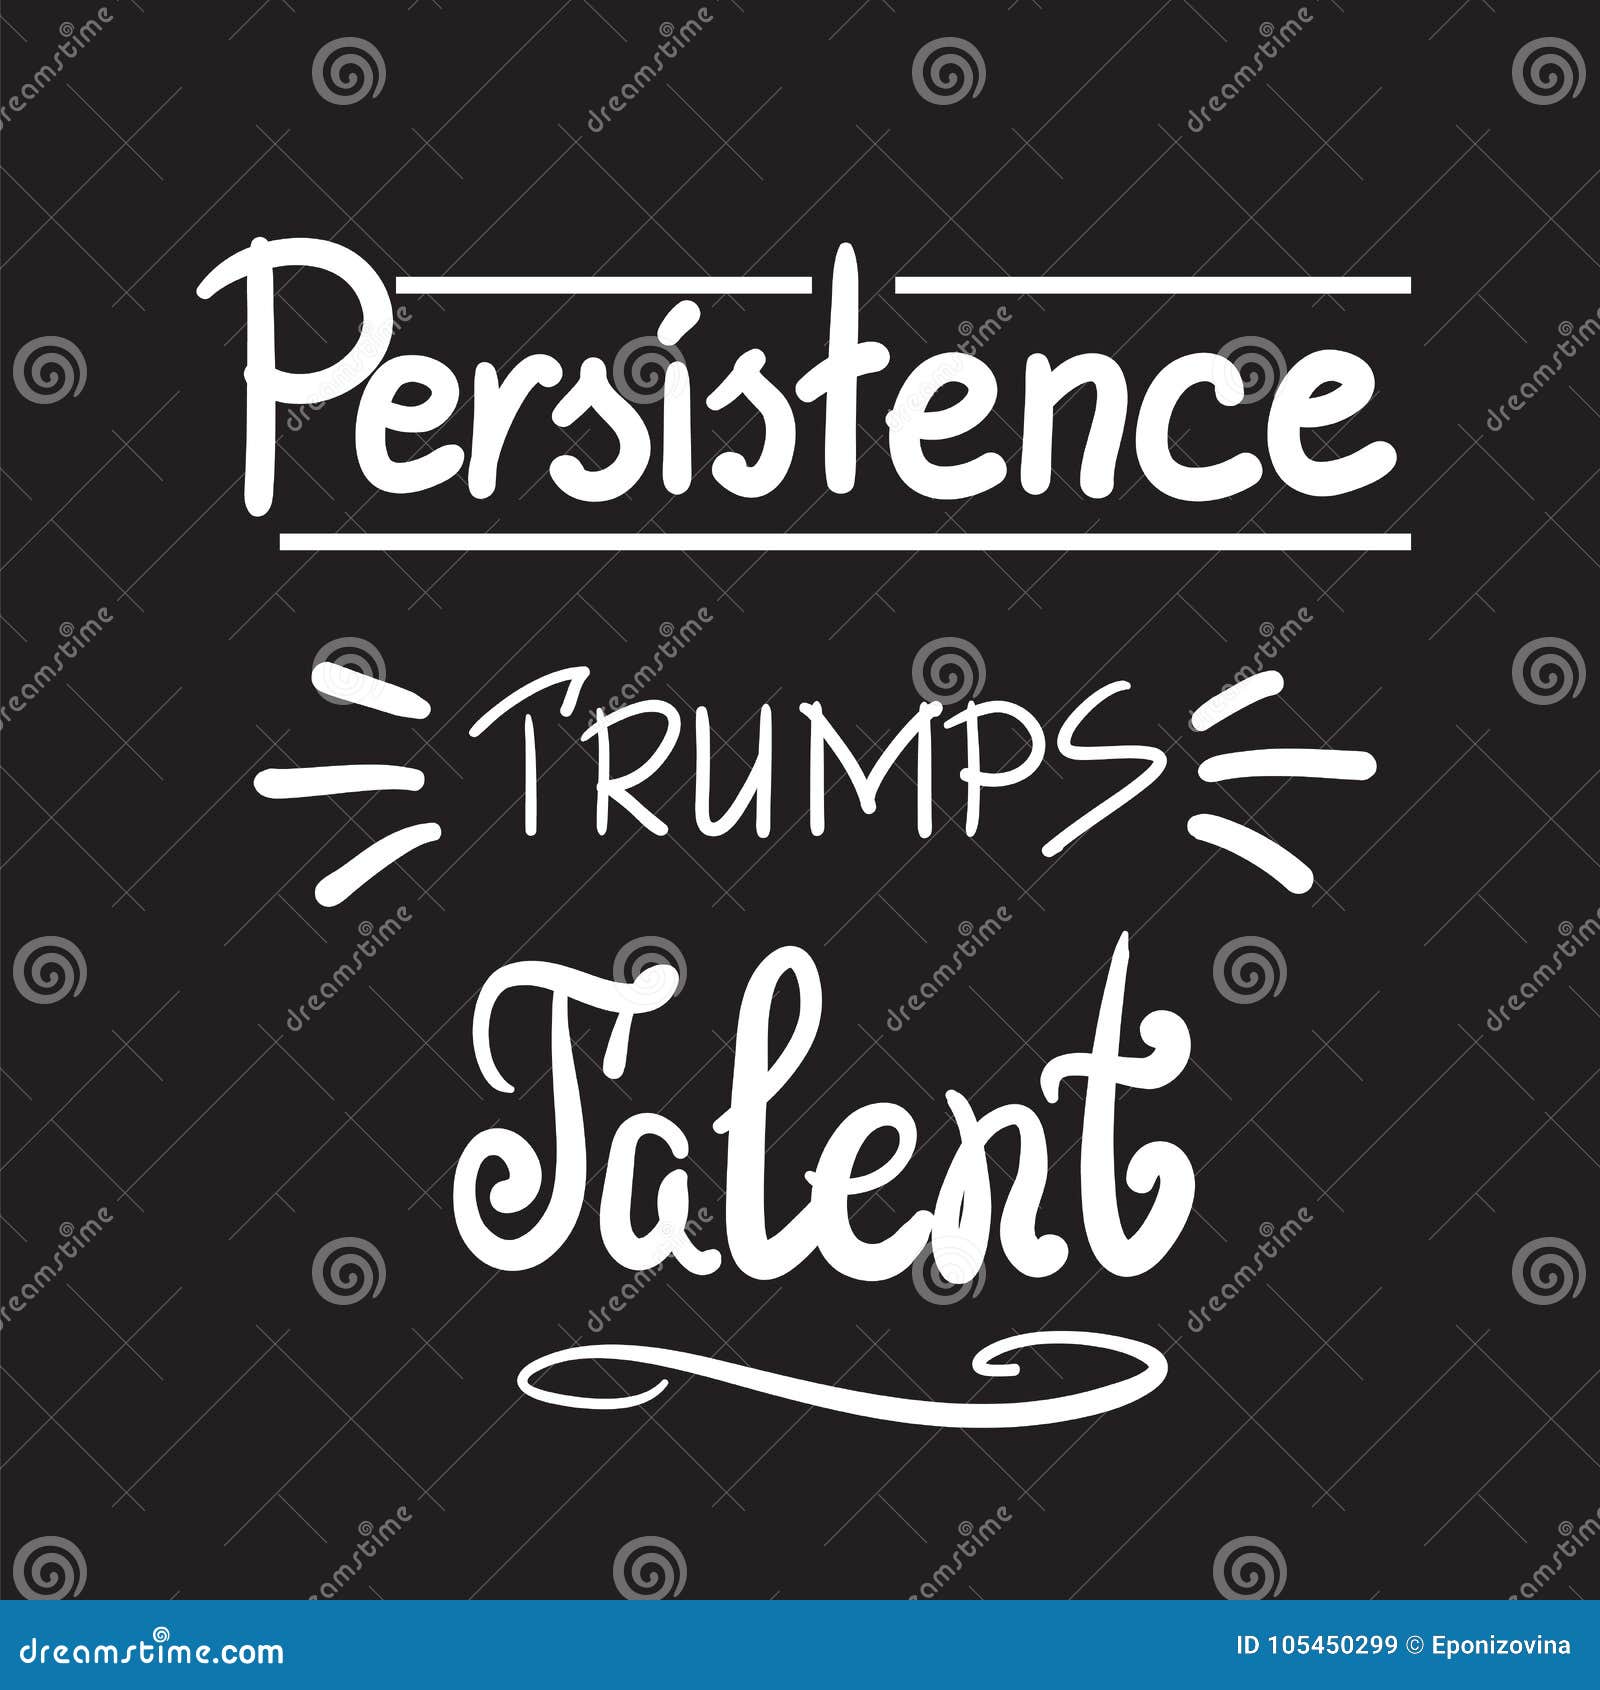 persistence trumps talent quote lettering. black and white style